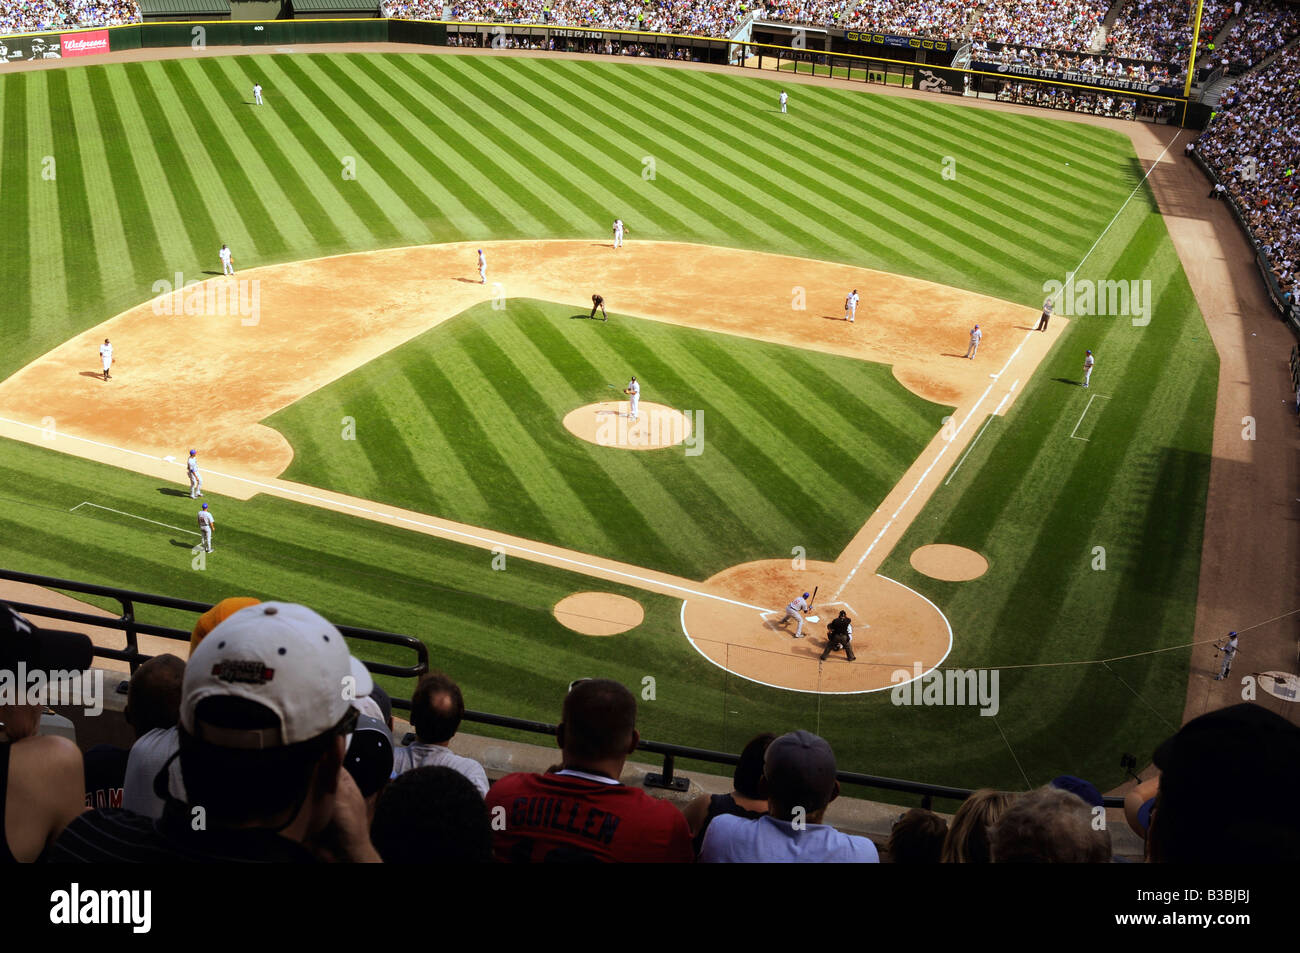 Us Cellular Field Stadium Aerial View In Chicago High-Res Stock Photo -  Getty Images